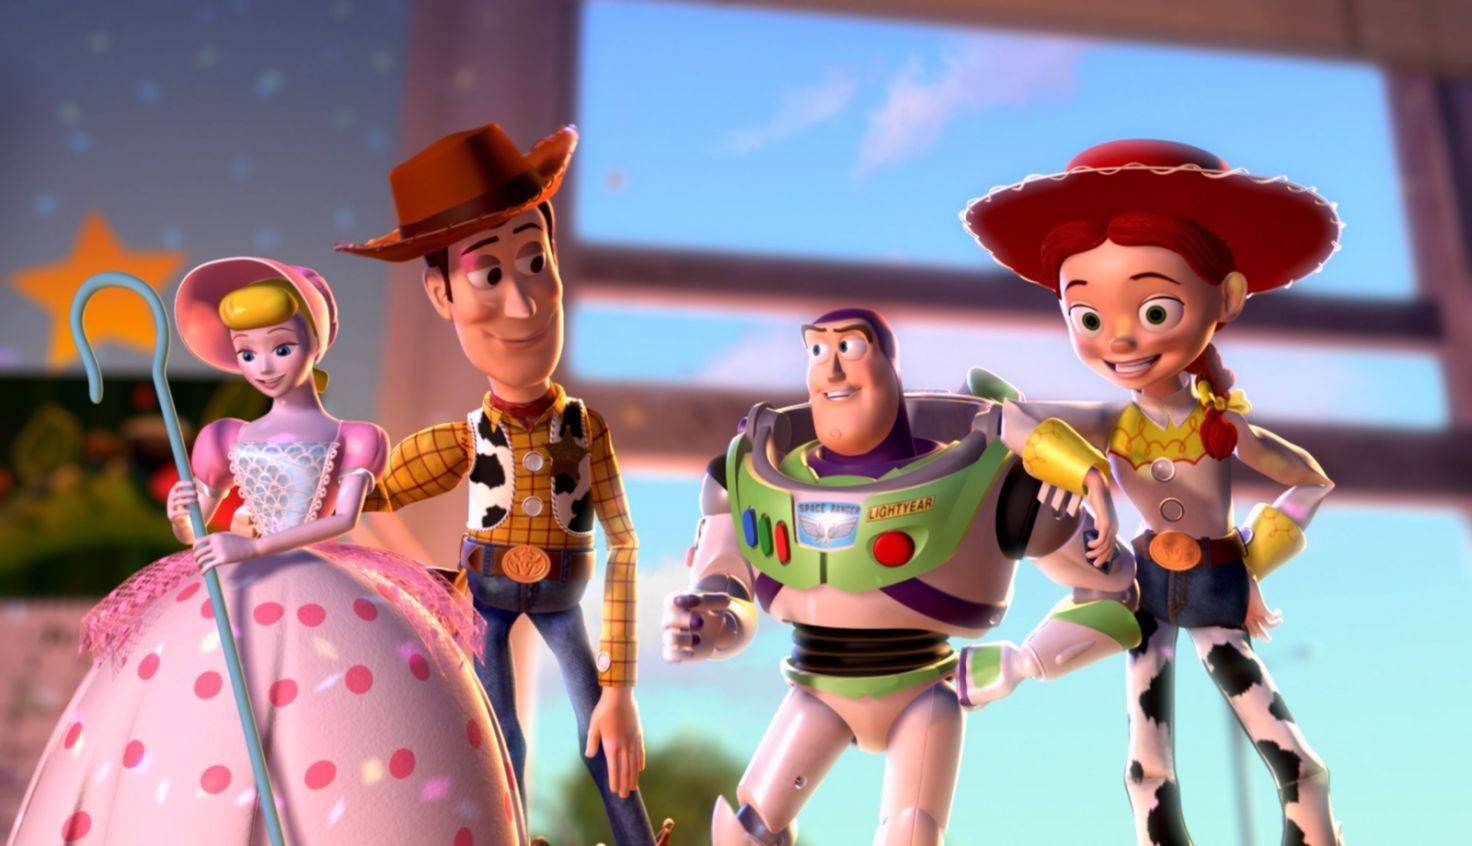 Toy Story Couple Partners Background